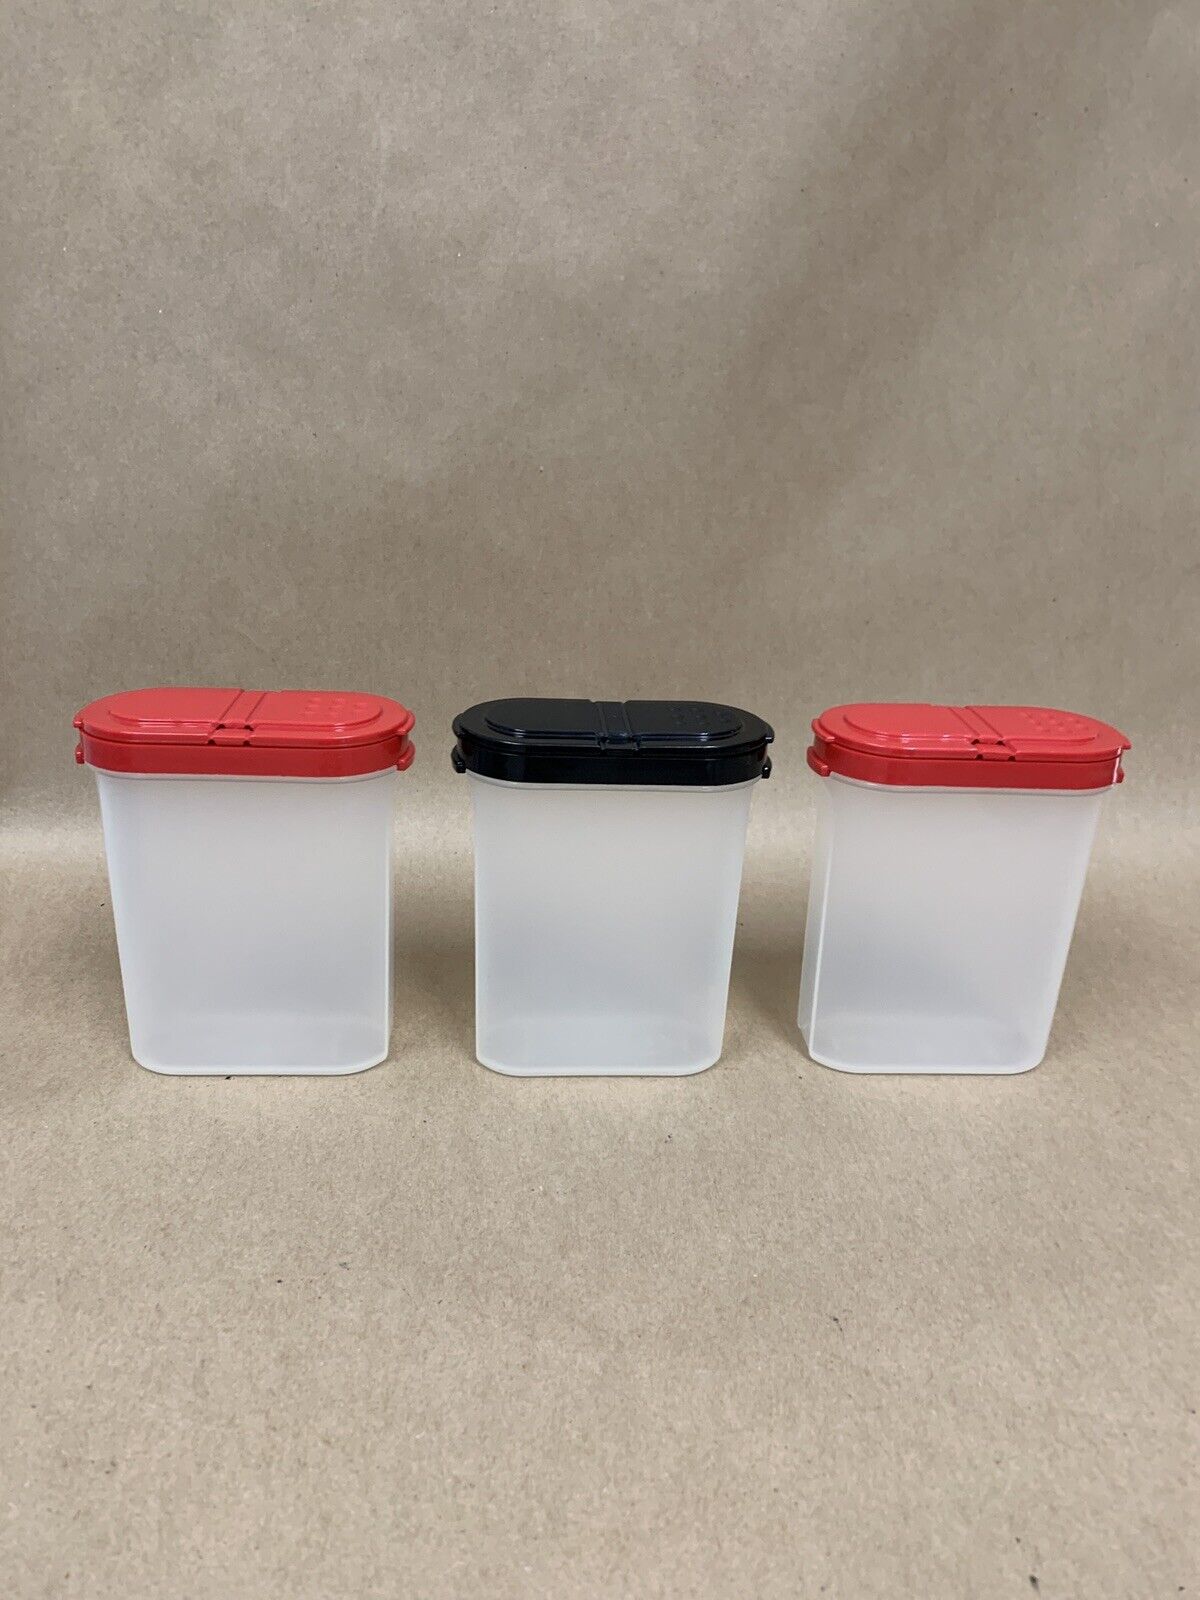 Set of 3 Tupperware Large Spice Shakers 1846D Modular Mates Red Black Lids